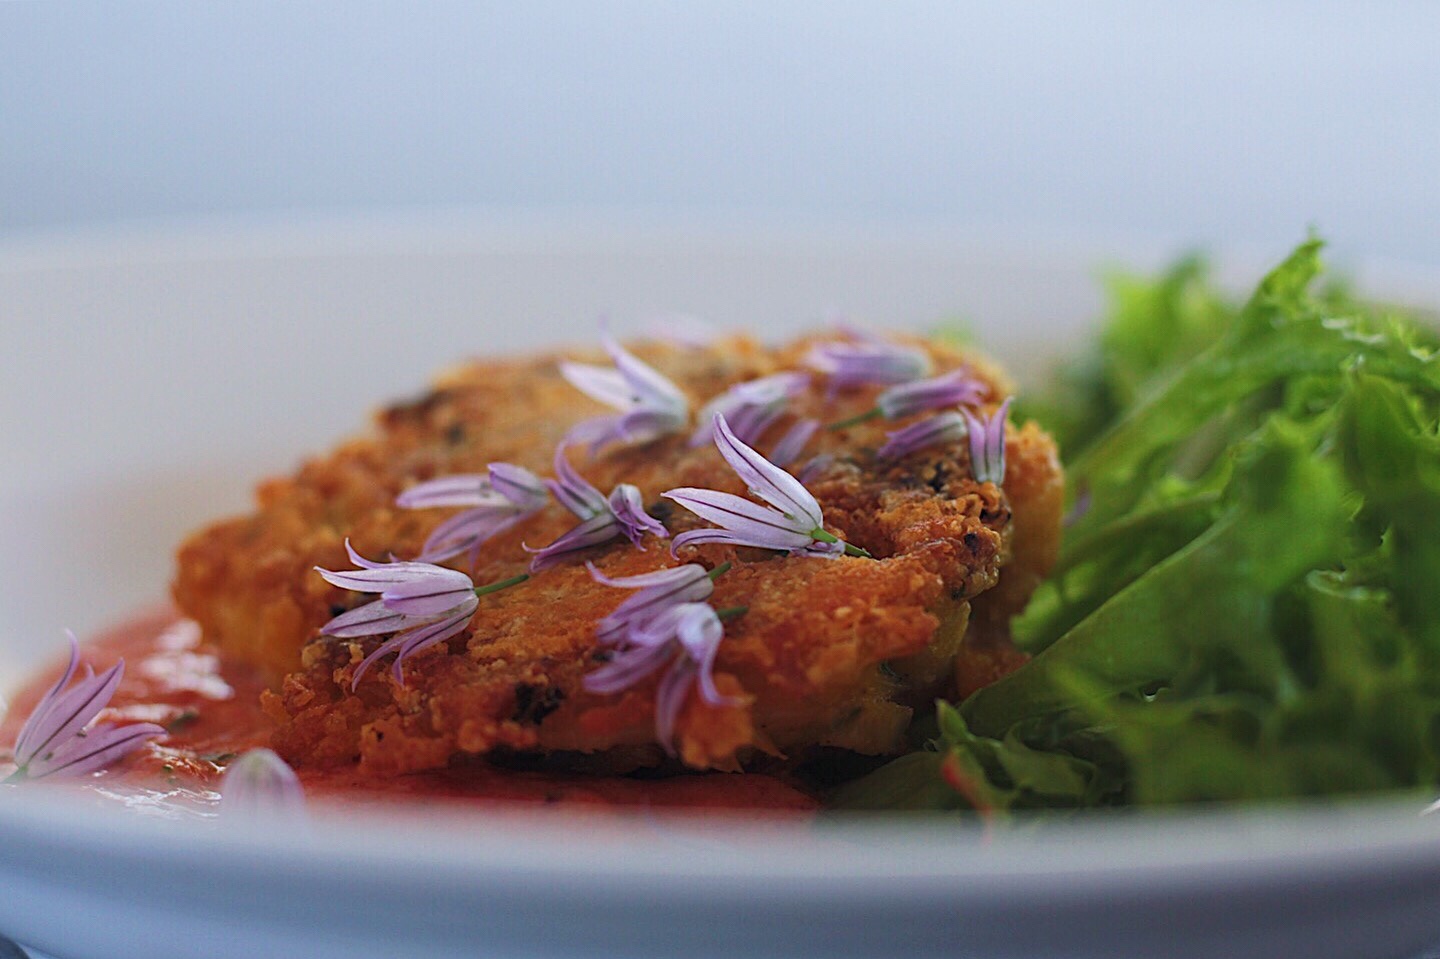 Crab cake with purple chive blossoms and lettuce garnishing.